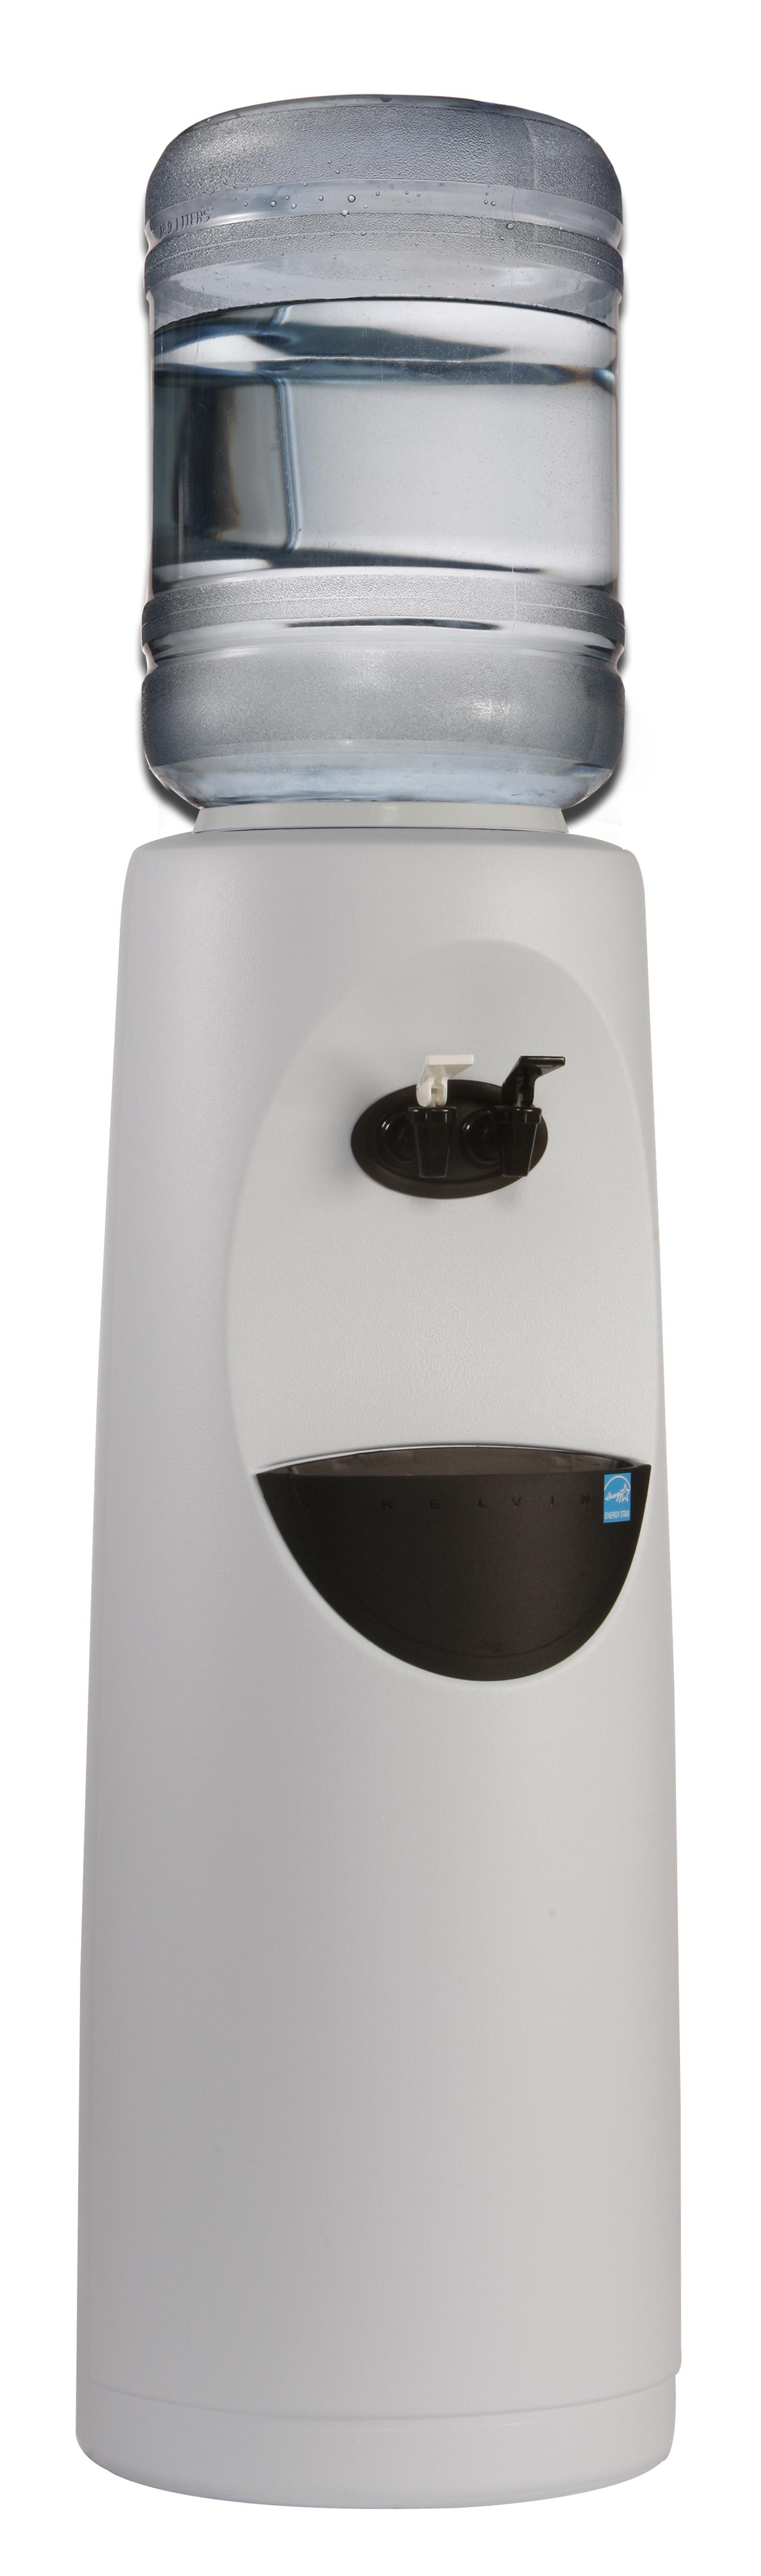 Kelvin Water Cooler - Great Performance at a Great Price! White Cabinet